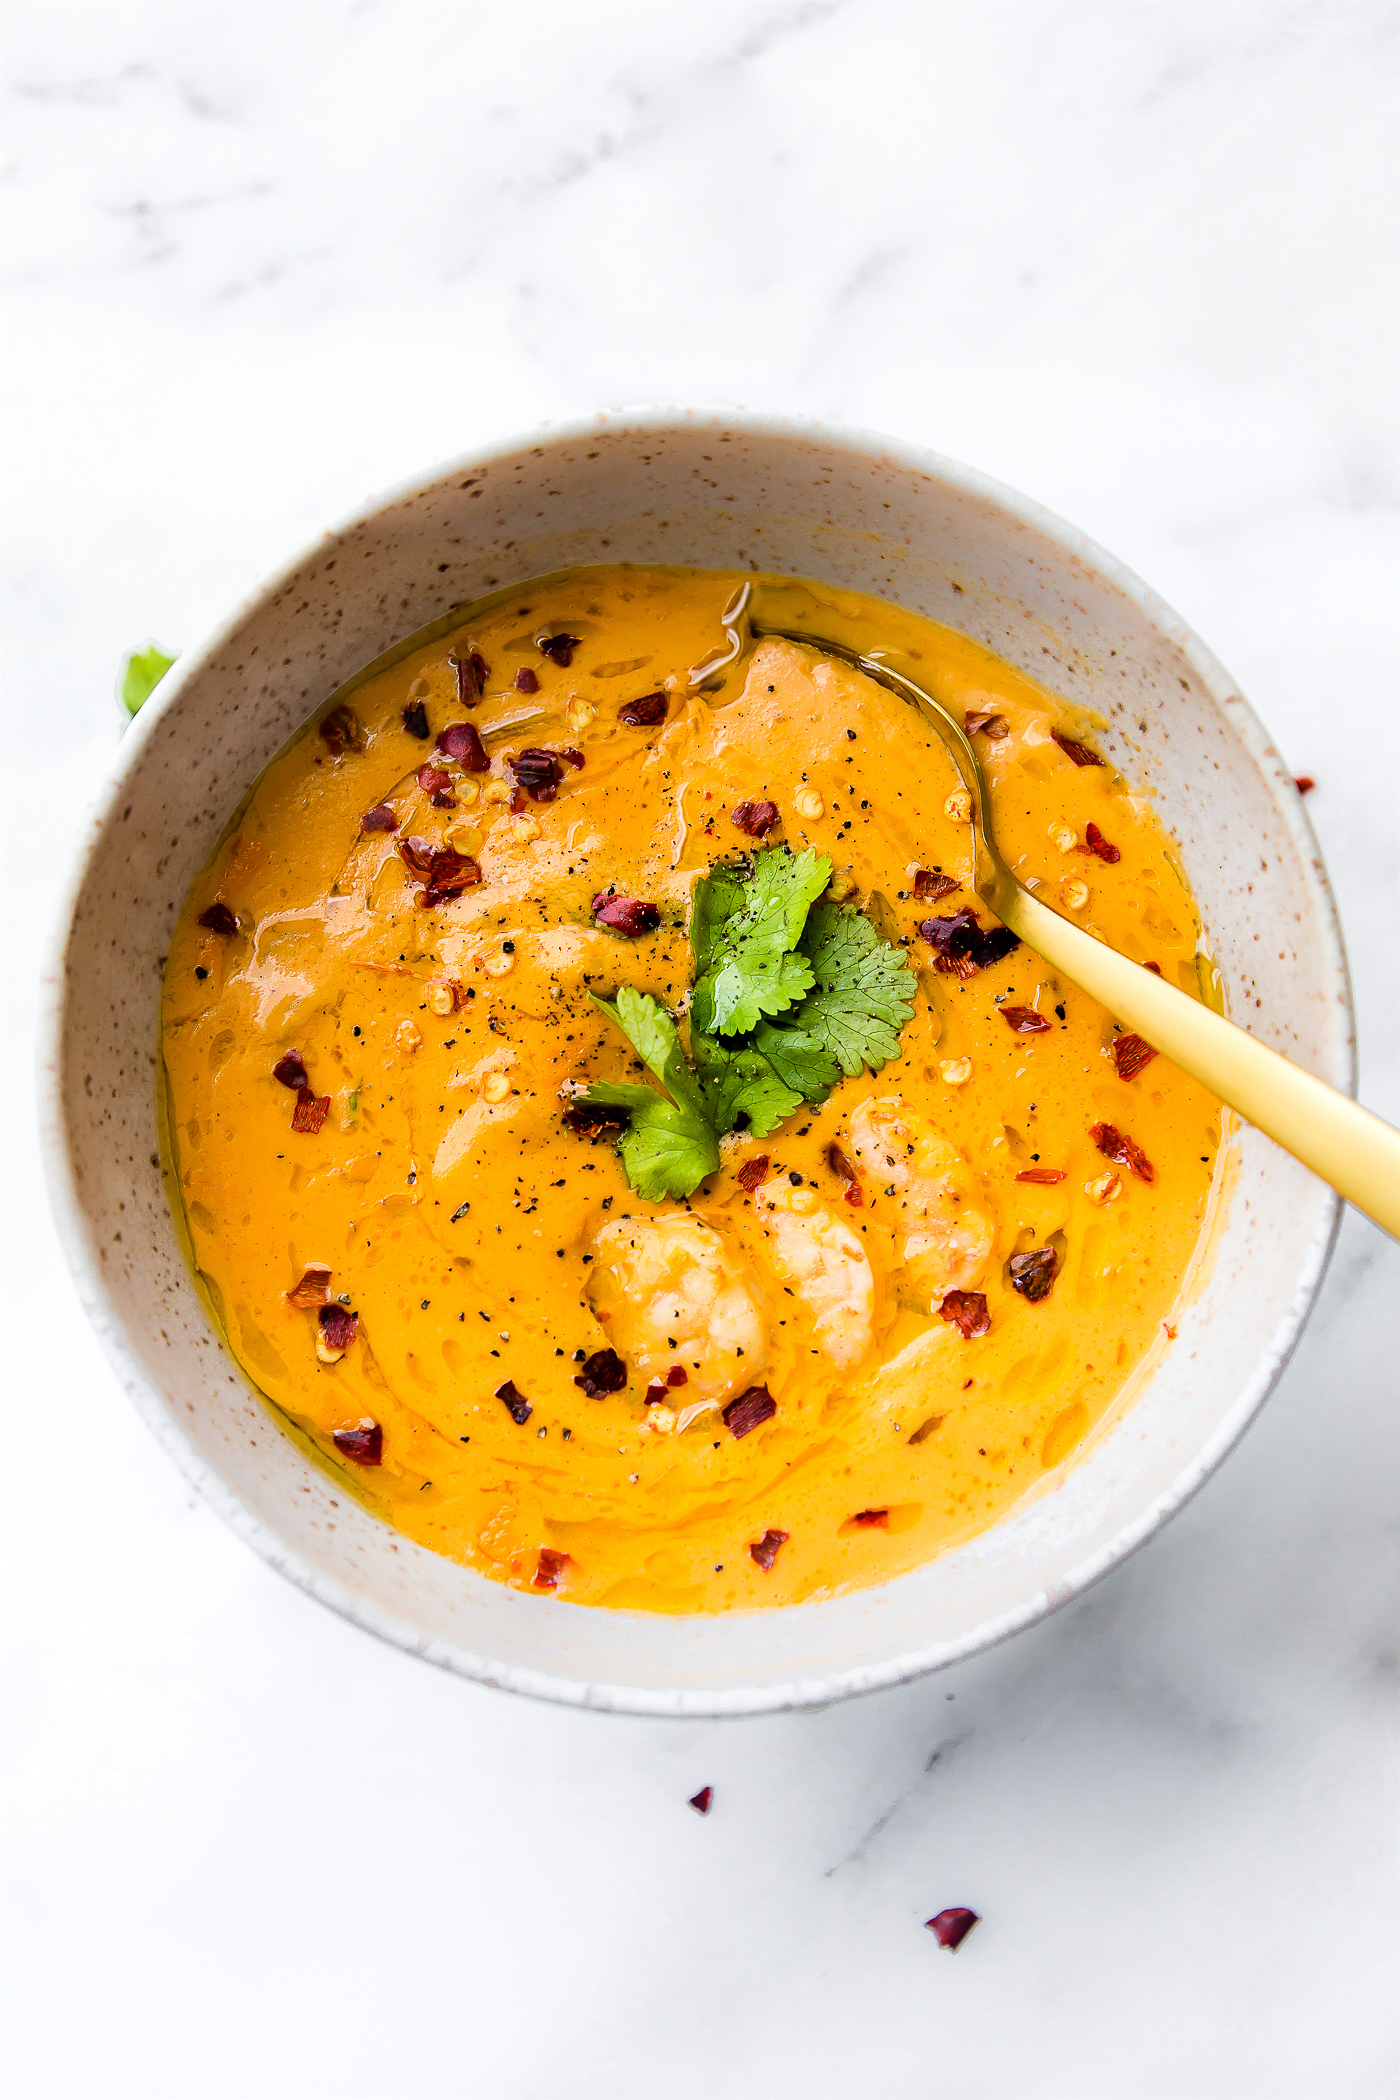 This creamy roasted red pepper bisque with Shrimp is dairy free, paleo, and totally delicious! A spicy bisque with healing immunity boosting nutrients. Perfect for cold weather or under the weather! Also a great way to get veggies into your meal. Nourish your family, feed your friends, or enjoy this robust roasted red pepper bisque recipe all to yourself. Whole 30 compliant. !